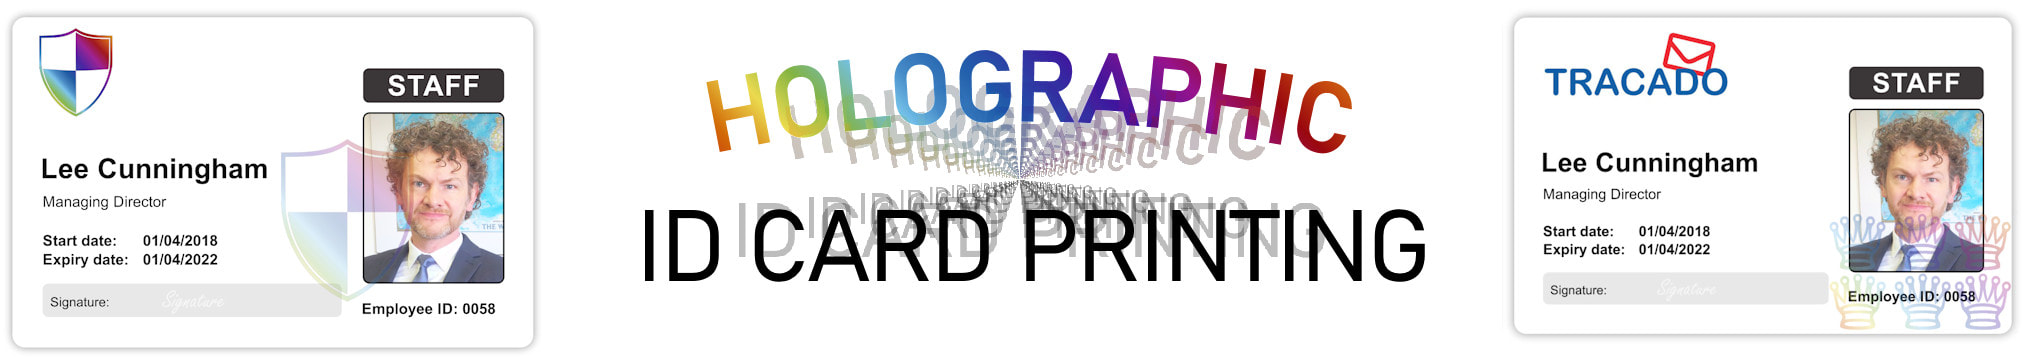 Bradford holographic ID card print service. Employee Identity cards with hologram or holograph security mark.